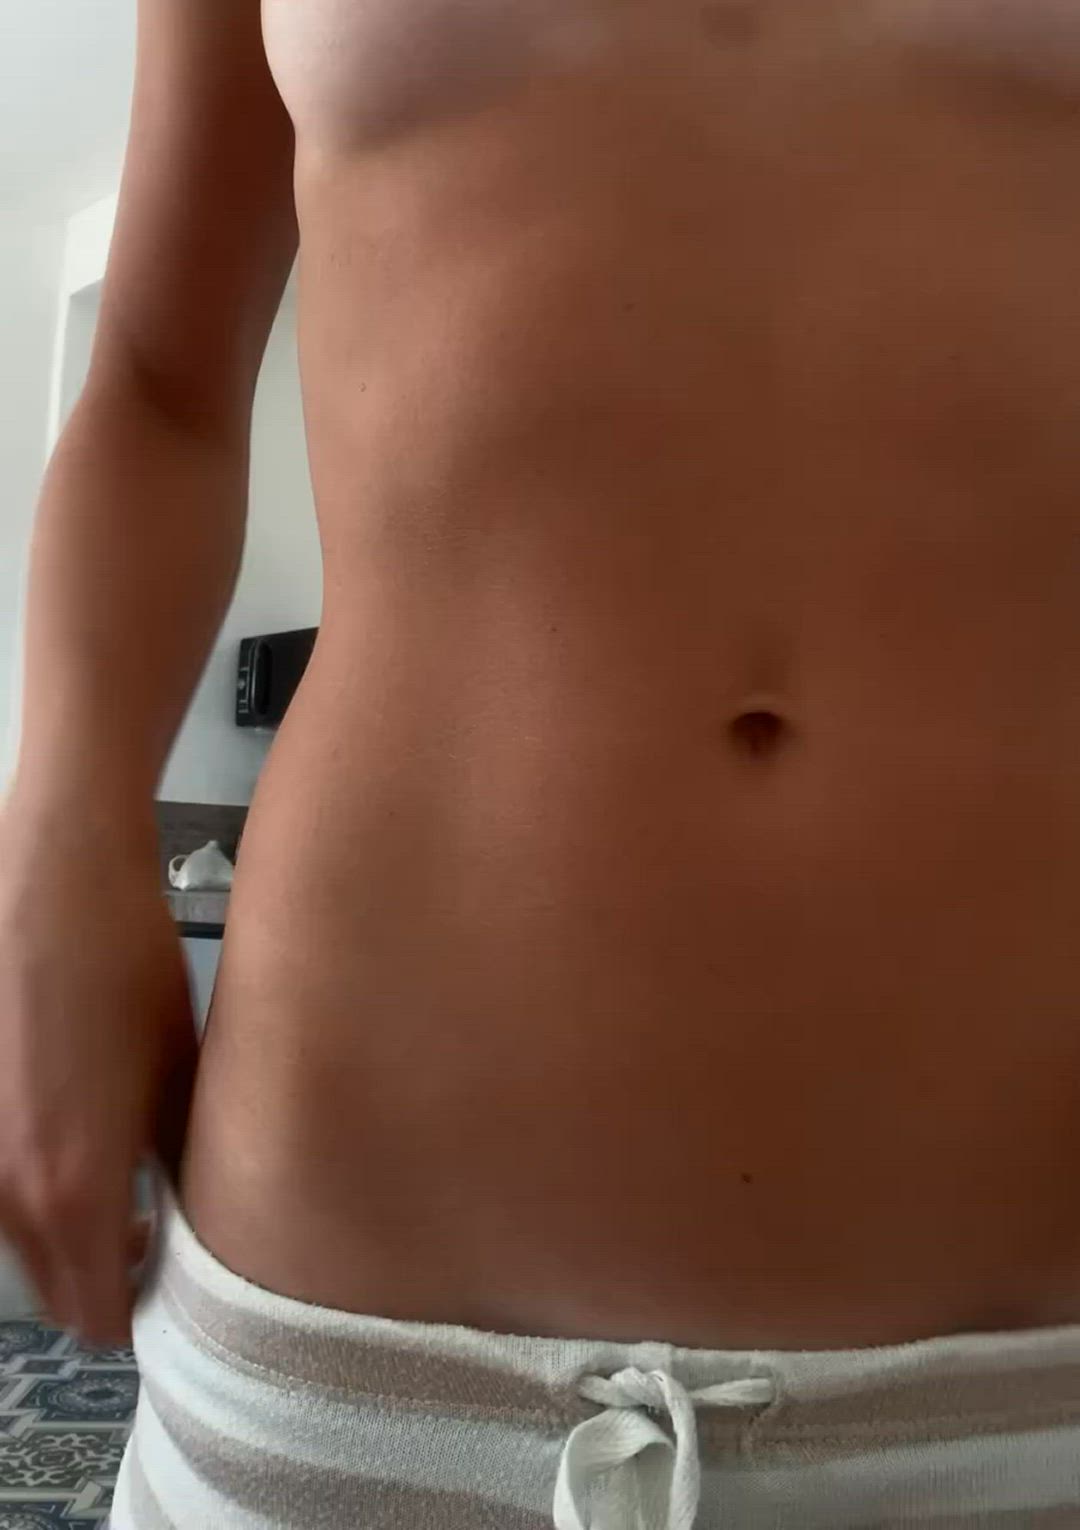 Abs porn video with onlyfans model europixie <strong>@europixie</strong>